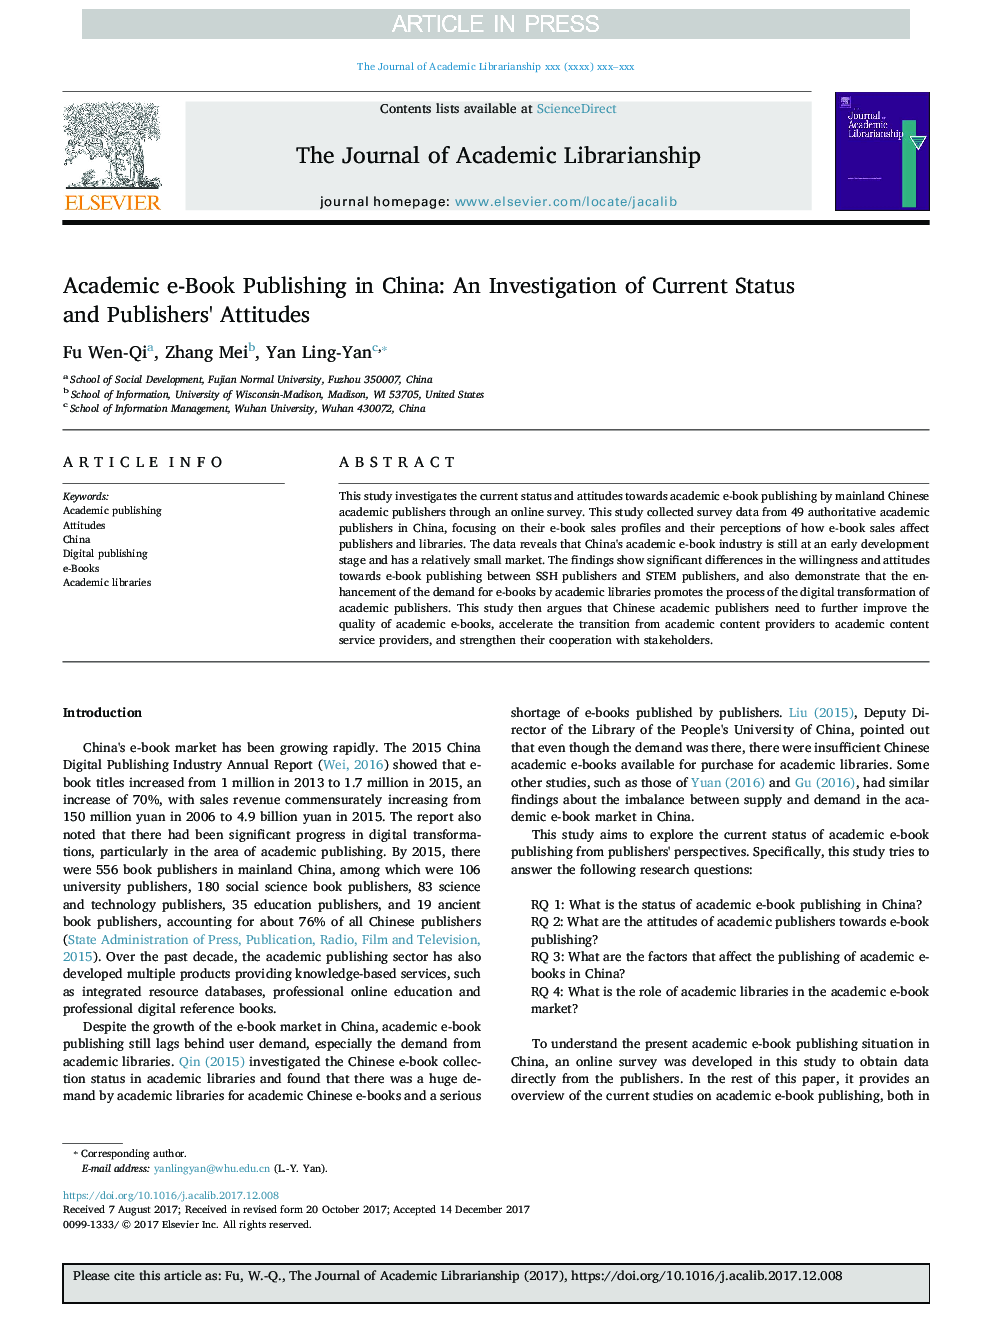 Academic e-Book Publishing in China: An Investigation of Current Status and Publishers' Attitudes